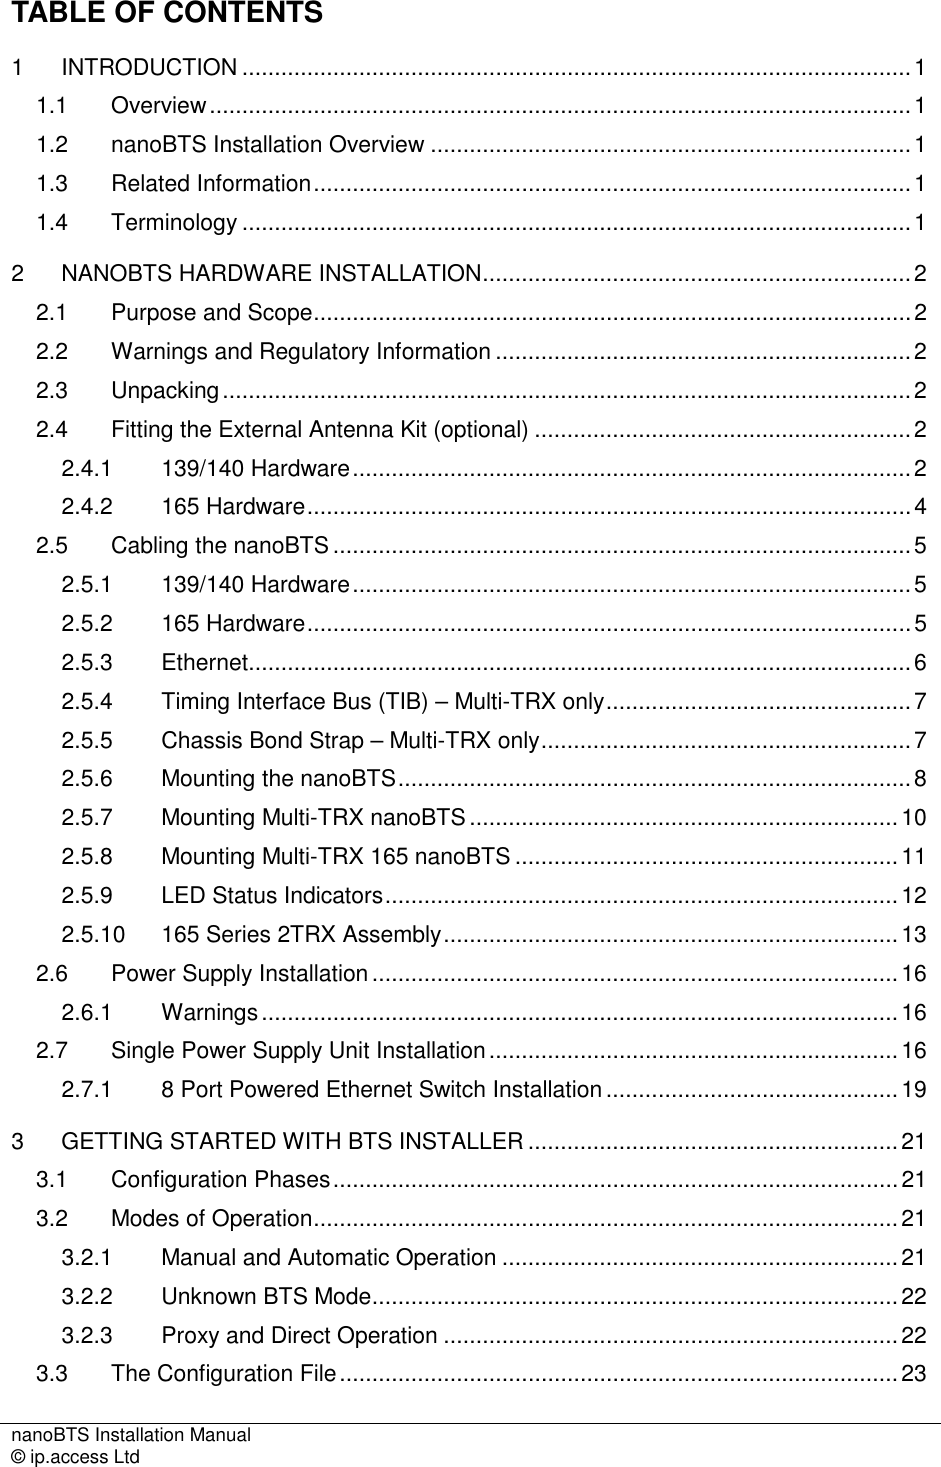 nanoBTS Installation Manual   © ip.access Ltd    TABLE OF CONTENTS 1 INTRODUCTION .......................................................................................................1 1.1 Overview............................................................................................................1 1.2 nanoBTS Installation Overview ..........................................................................1 1.3 Related Information............................................................................................1 1.4 Terminology .......................................................................................................1 2 NANOBTS HARDWARE INSTALLATION..................................................................2 2.1 Purpose and Scope............................................................................................2 2.2 Warnings and Regulatory Information ................................................................2 2.3 Unpacking..........................................................................................................2 2.4 Fitting the External Antenna Kit (optional) ..........................................................2 2.4.1 139/140 Hardware......................................................................................2 2.4.2 165 Hardware.............................................................................................4 2.5 Cabling the nanoBTS .........................................................................................5 2.5.1 139/140 Hardware......................................................................................5 2.5.2 165 Hardware.............................................................................................5 2.5.3 Ethernet......................................................................................................6 2.5.4 Timing Interface Bus (TIB) – Multi-TRX only...............................................7 2.5.5 Chassis Bond Strap – Multi-TRX only.........................................................7 2.5.6 Mounting the nanoBTS...............................................................................8 2.5.7 Mounting Multi-TRX nanoBTS..................................................................10 2.5.8 Mounting Multi-TRX 165 nanoBTS ...........................................................11 2.5.9 LED Status Indicators...............................................................................12 2.5.10 165 Series 2TRX Assembly......................................................................13 2.6 Power Supply Installation.................................................................................16 2.6.1 Warnings..................................................................................................16 2.7 Single Power Supply Unit Installation...............................................................16 2.7.1 8 Port Powered Ethernet Switch Installation .............................................19 3 GETTING STARTED WITH BTS INSTALLER .........................................................21 3.1 Configuration Phases.......................................................................................21 3.2 Modes of Operation..........................................................................................21 3.2.1 Manual and Automatic Operation .............................................................21 3.2.2 Unknown BTS Mode.................................................................................22 3.2.3 Proxy and Direct Operation ......................................................................22 3.3 The Configuration File......................................................................................23 